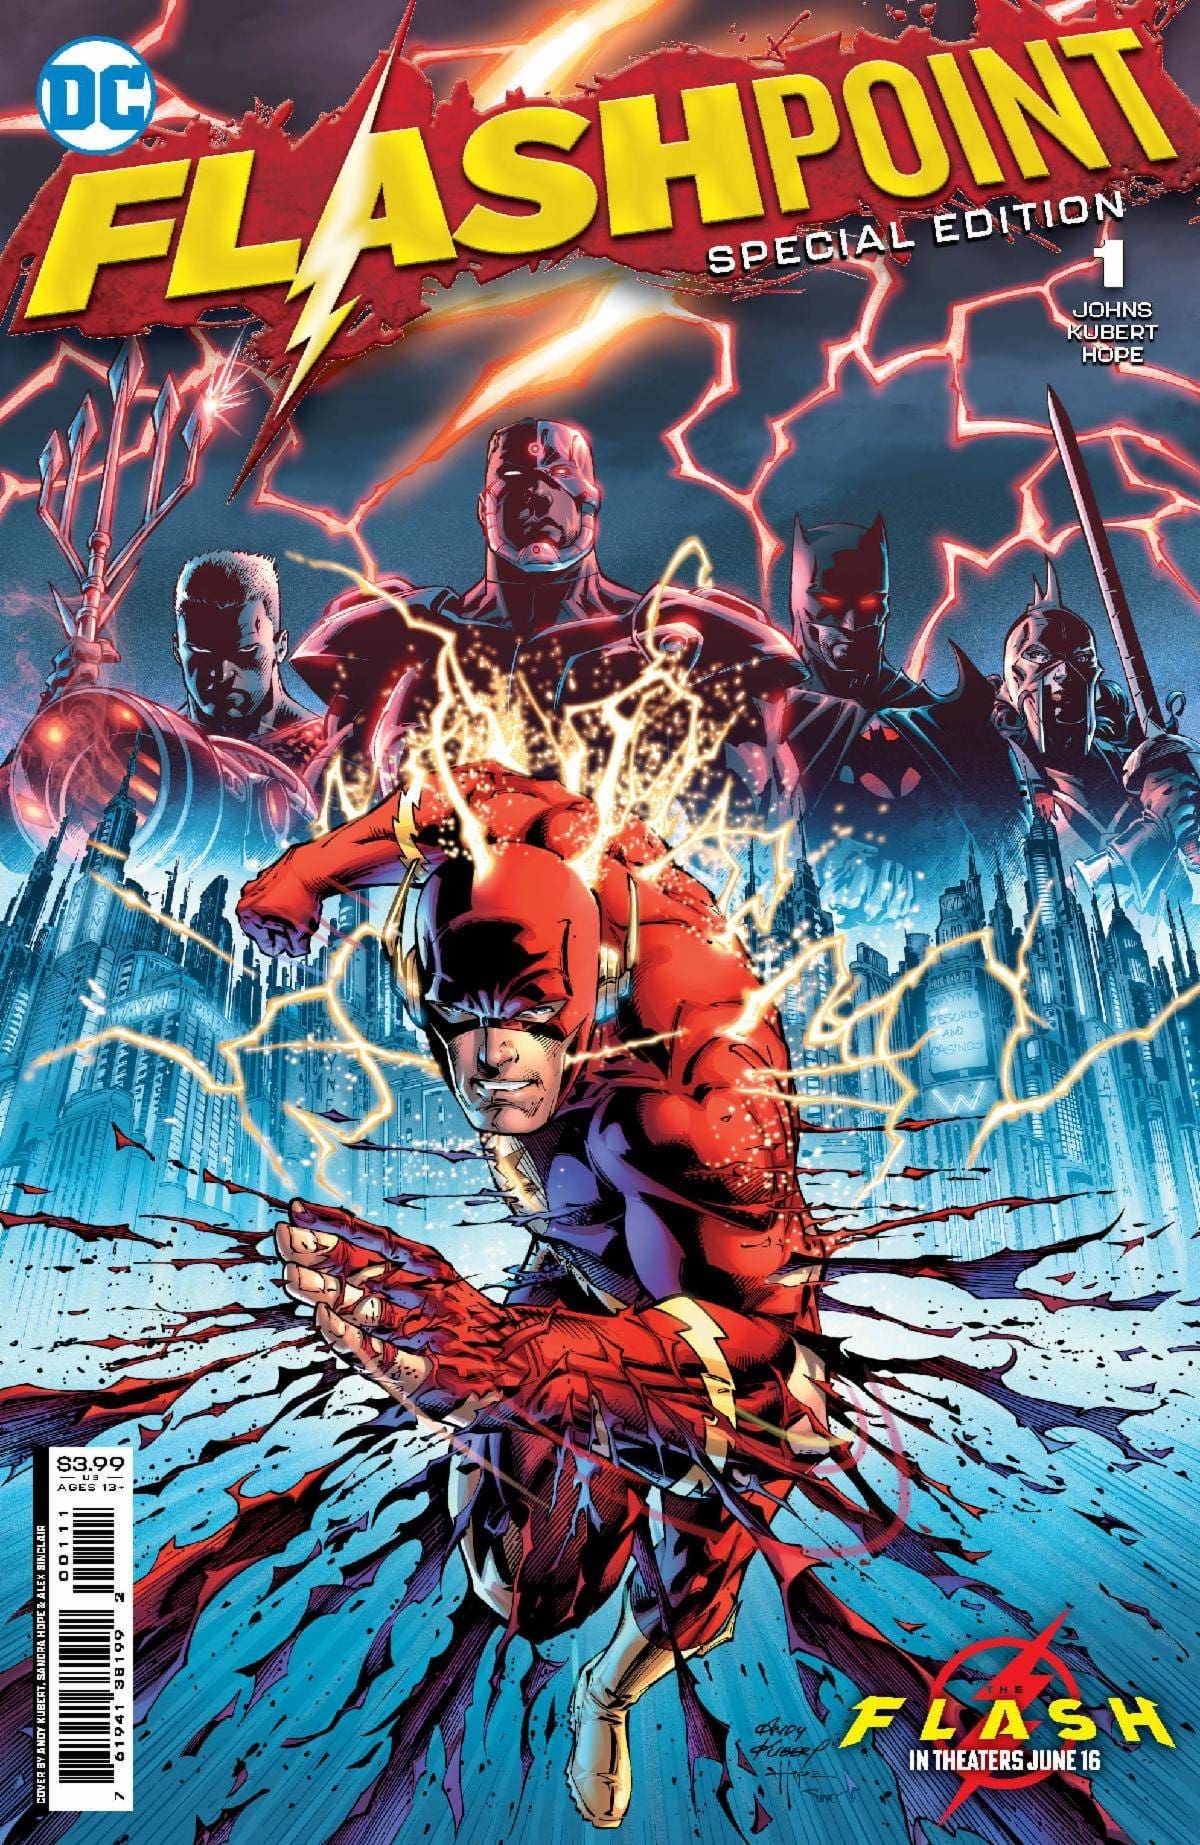 FLASHPOINT #1 SPECIAL EDITION (NET)